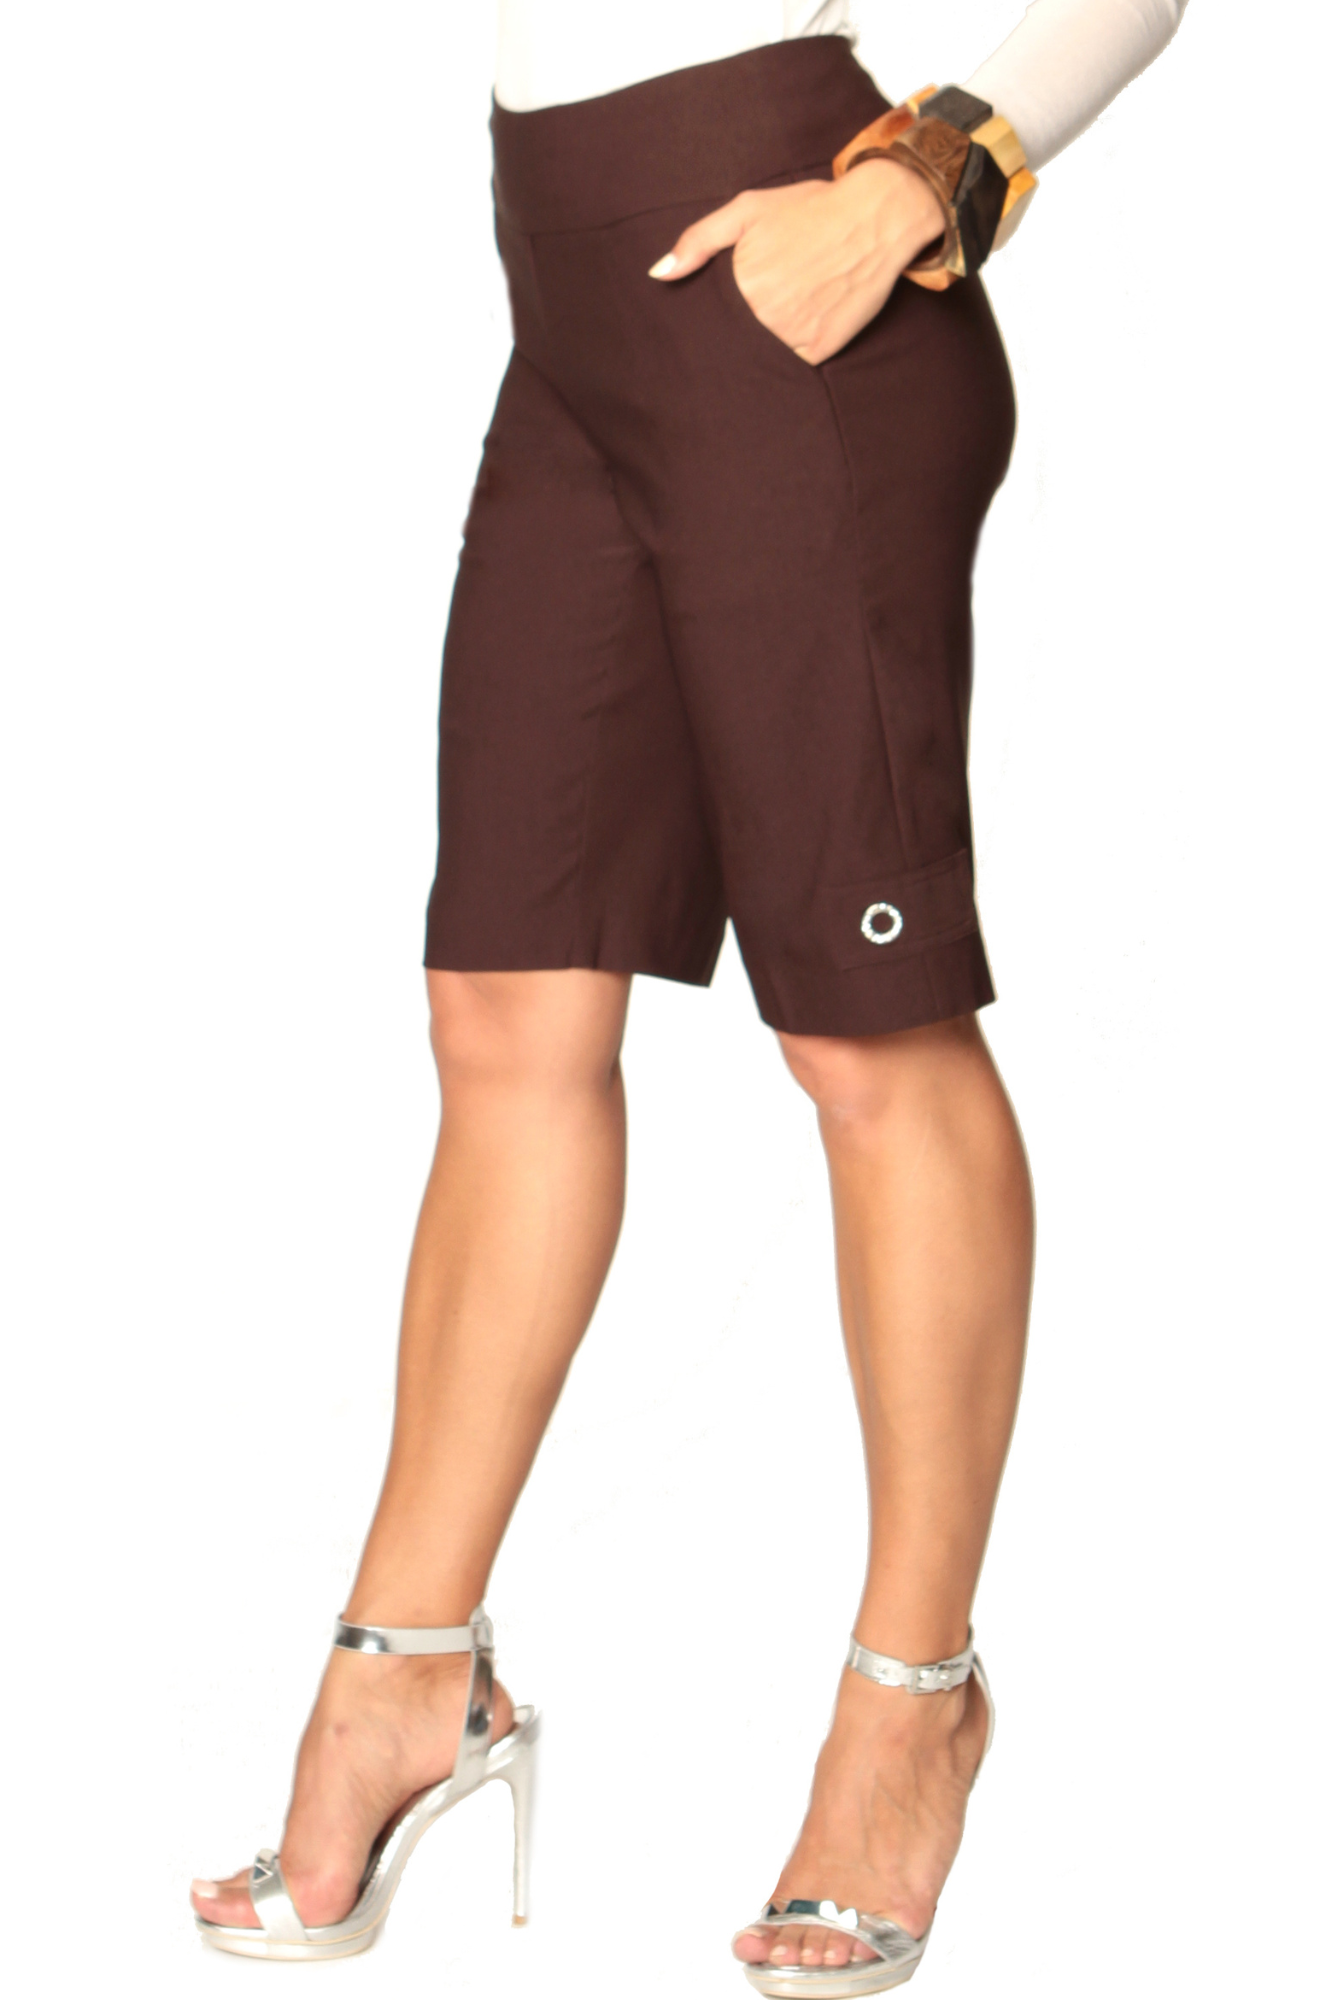 brown dressy shorts for special occasion, brown dressy shorts